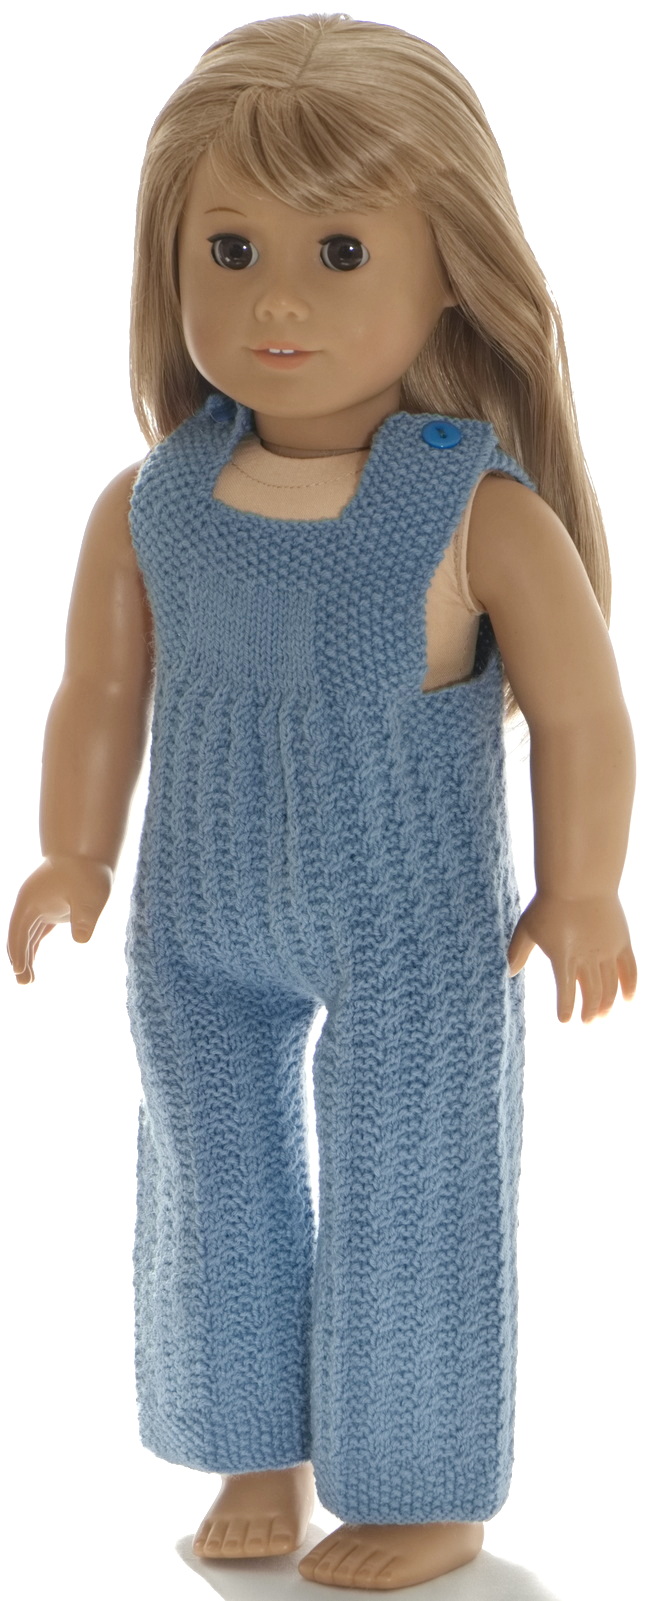 Here you will find a pair of beautiful blue pants (overall) for your doll.